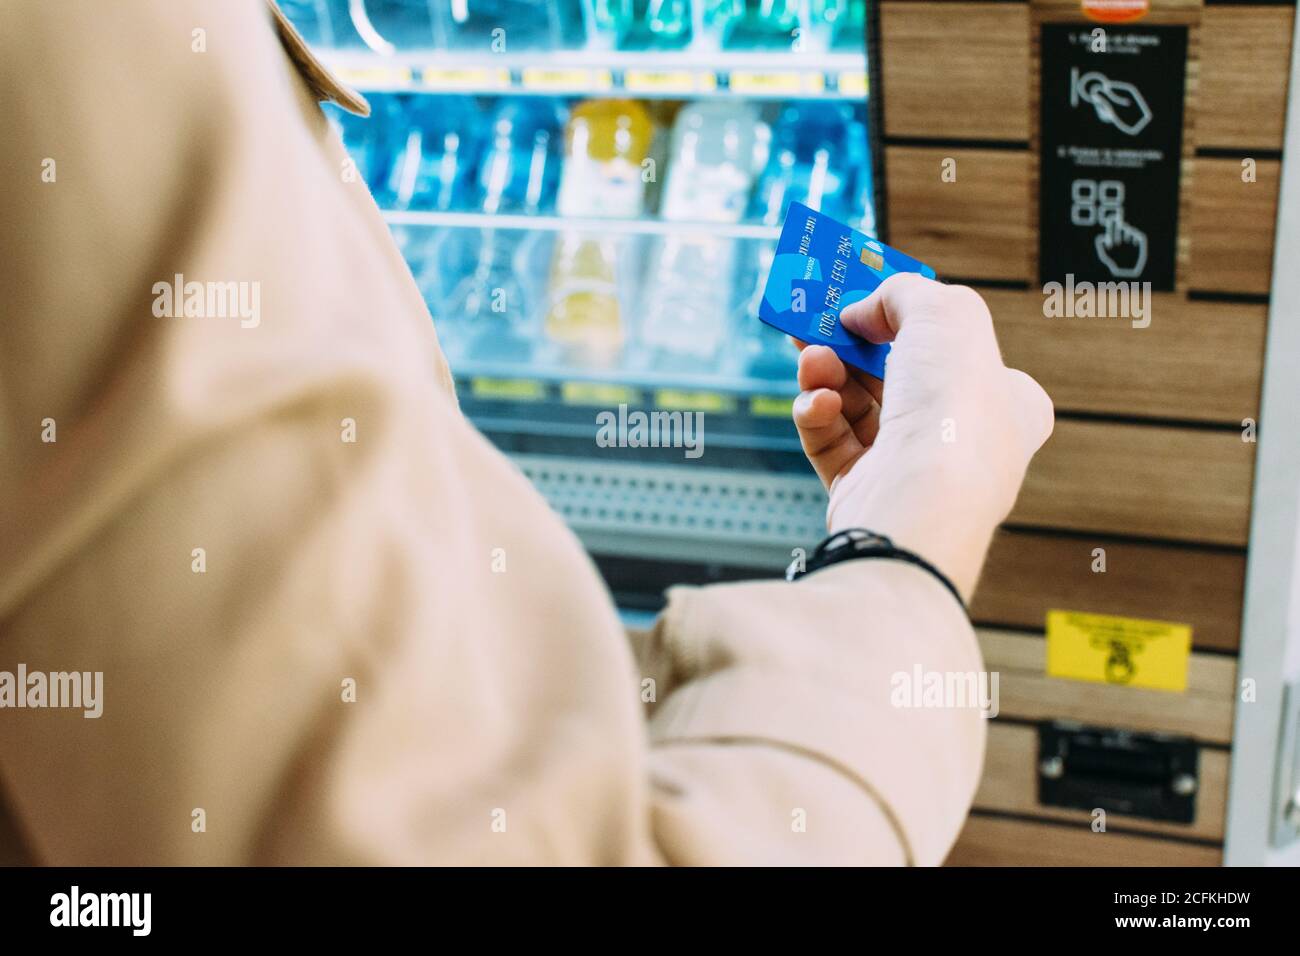 close-up of a woman using her credit card to pay at the vending machine Stock Photo